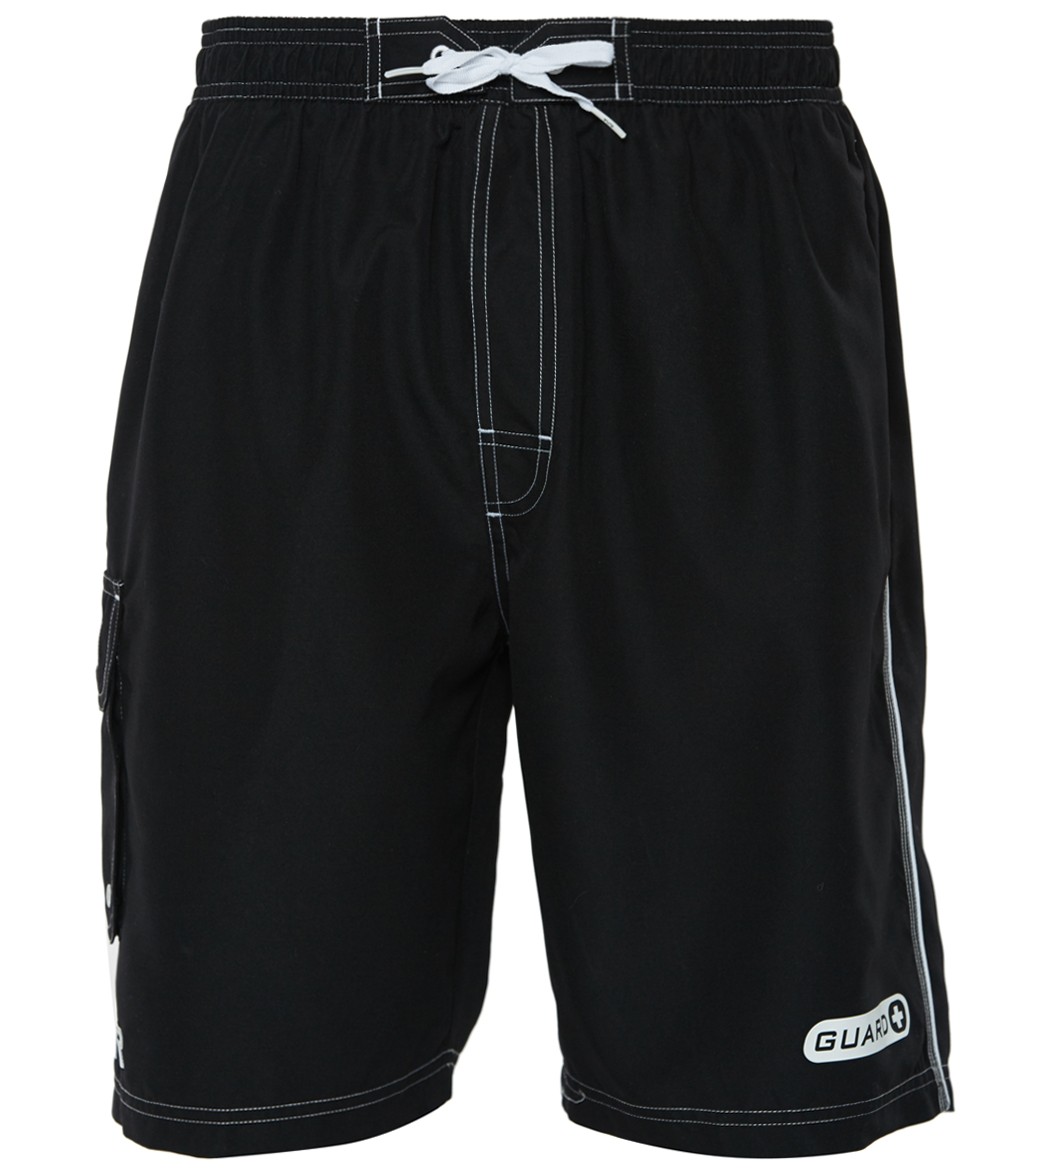 TYR Men's Guard Challenger Swim Short - Black Small Size Small Polyester - Swimoutlet.com